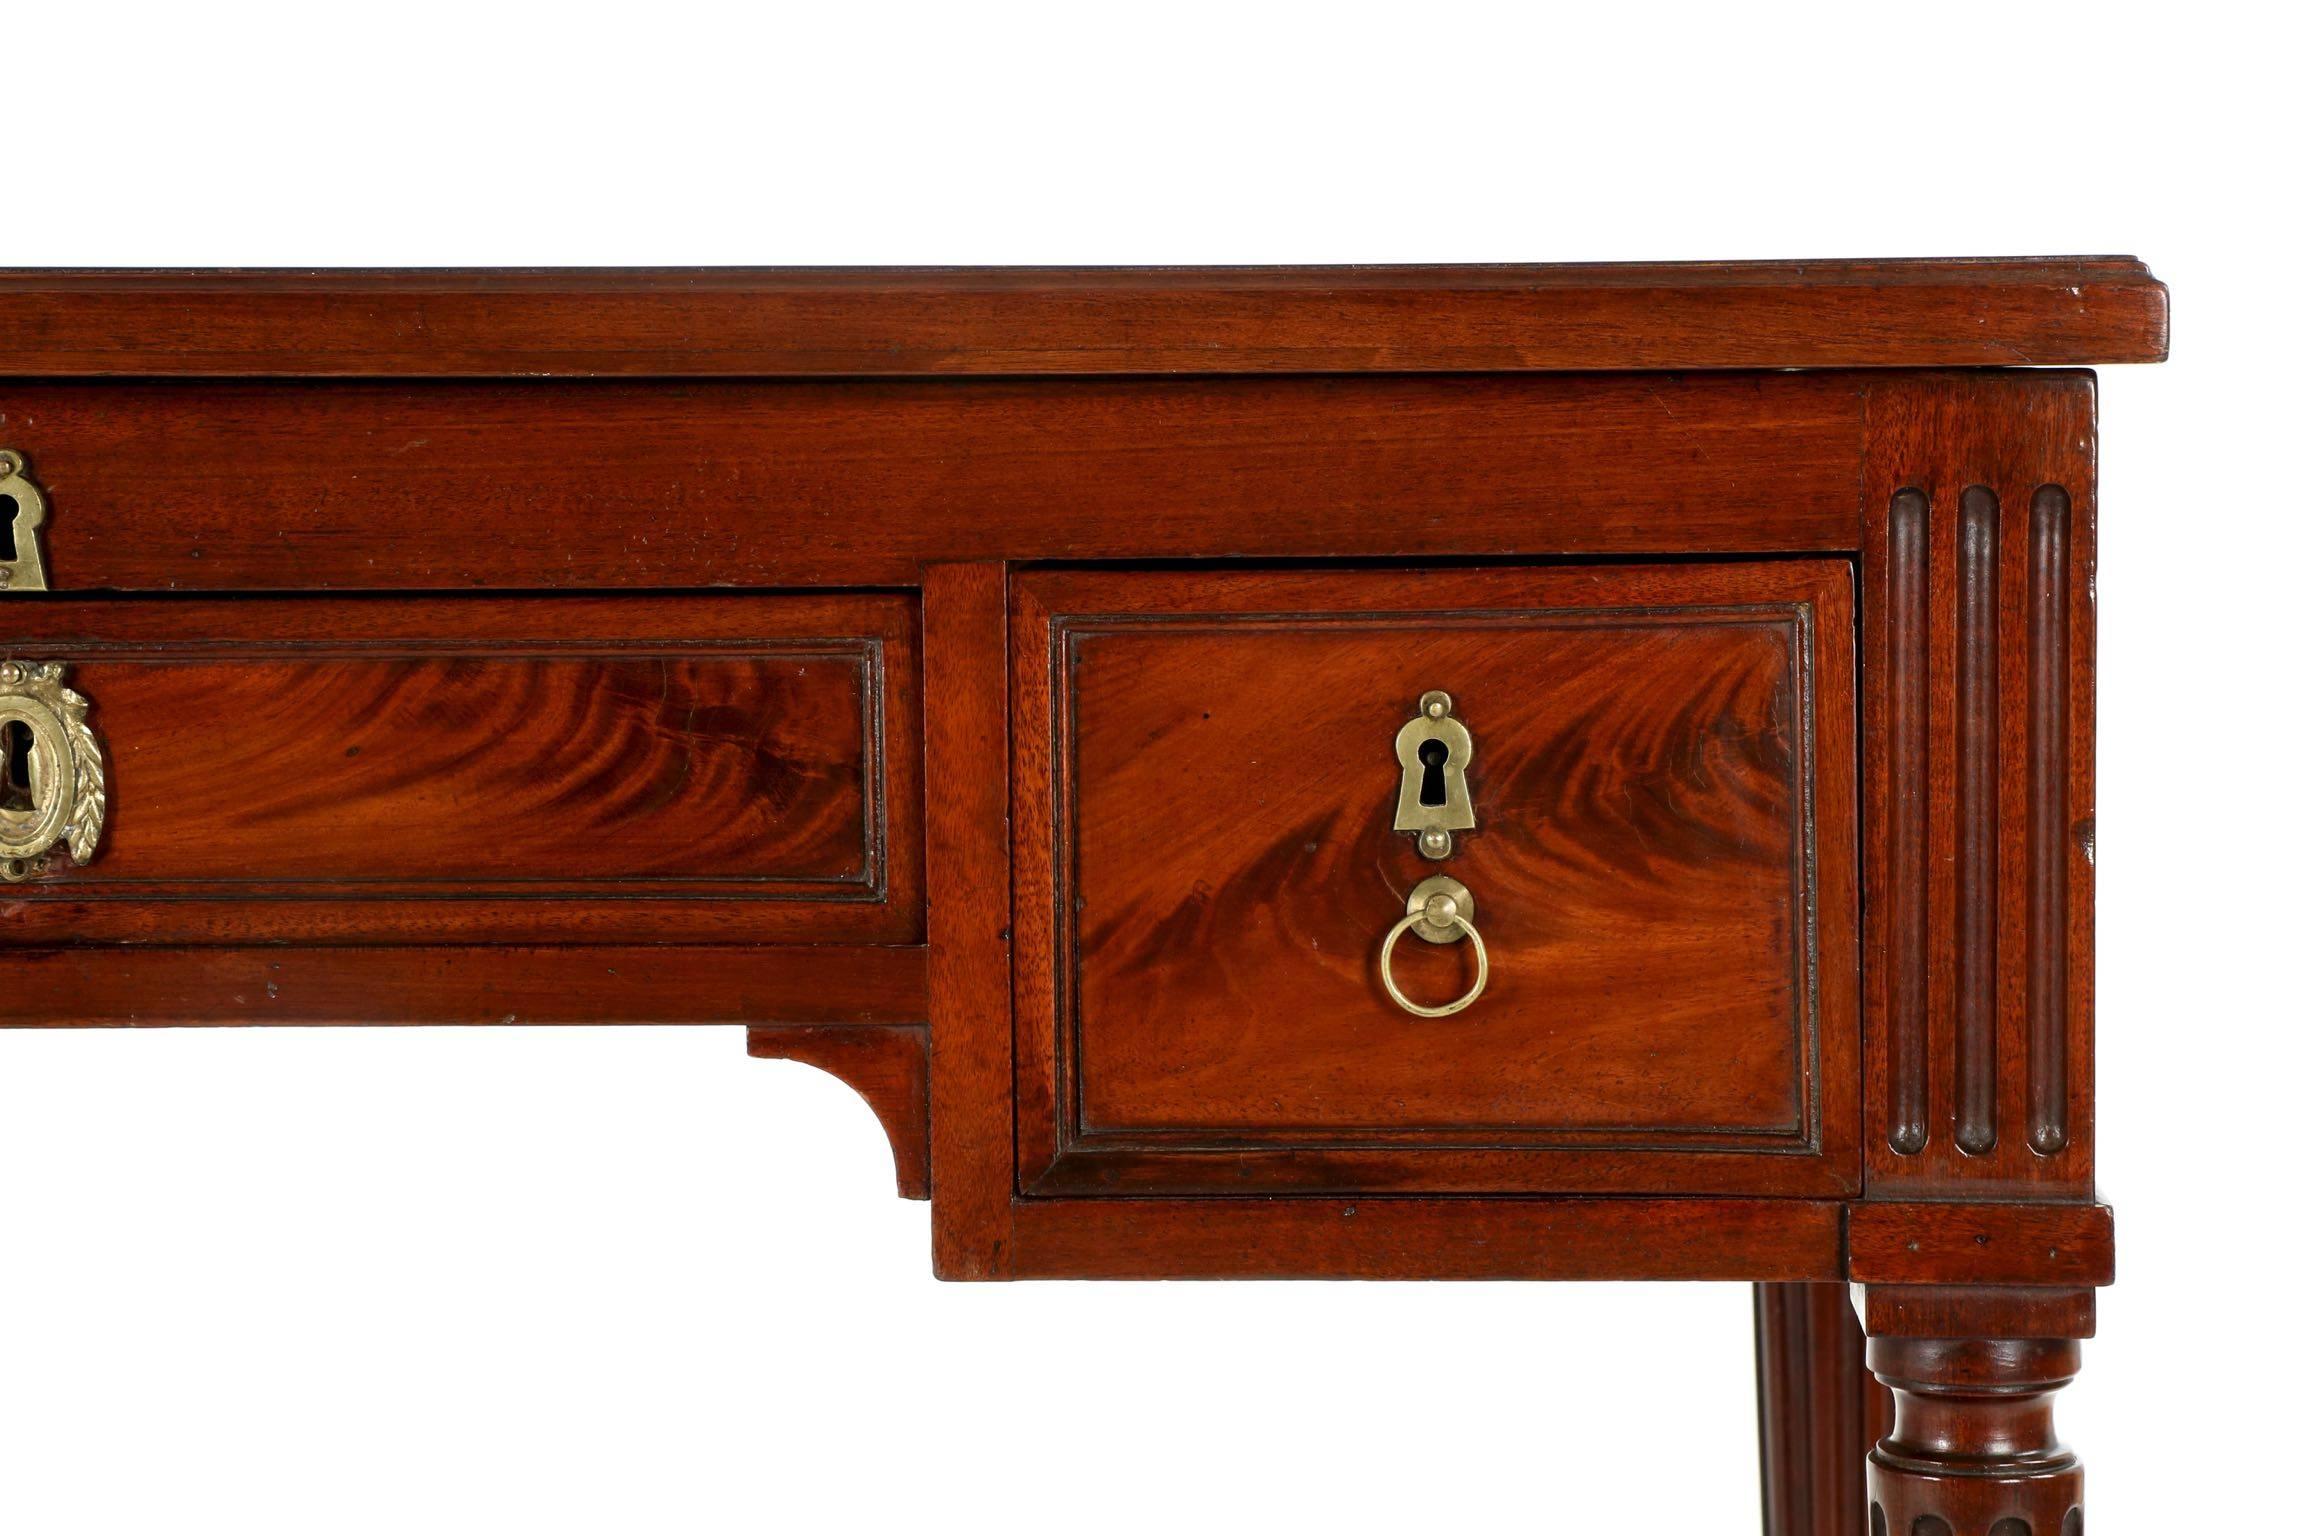 An exceptional dressing table of the finest quality, this exquisite work features the most exhuberant cuts of crotch-mahogany across the apron and top. The center drawer is characterized by billowing and perfectly symmetrical flames of mahogany